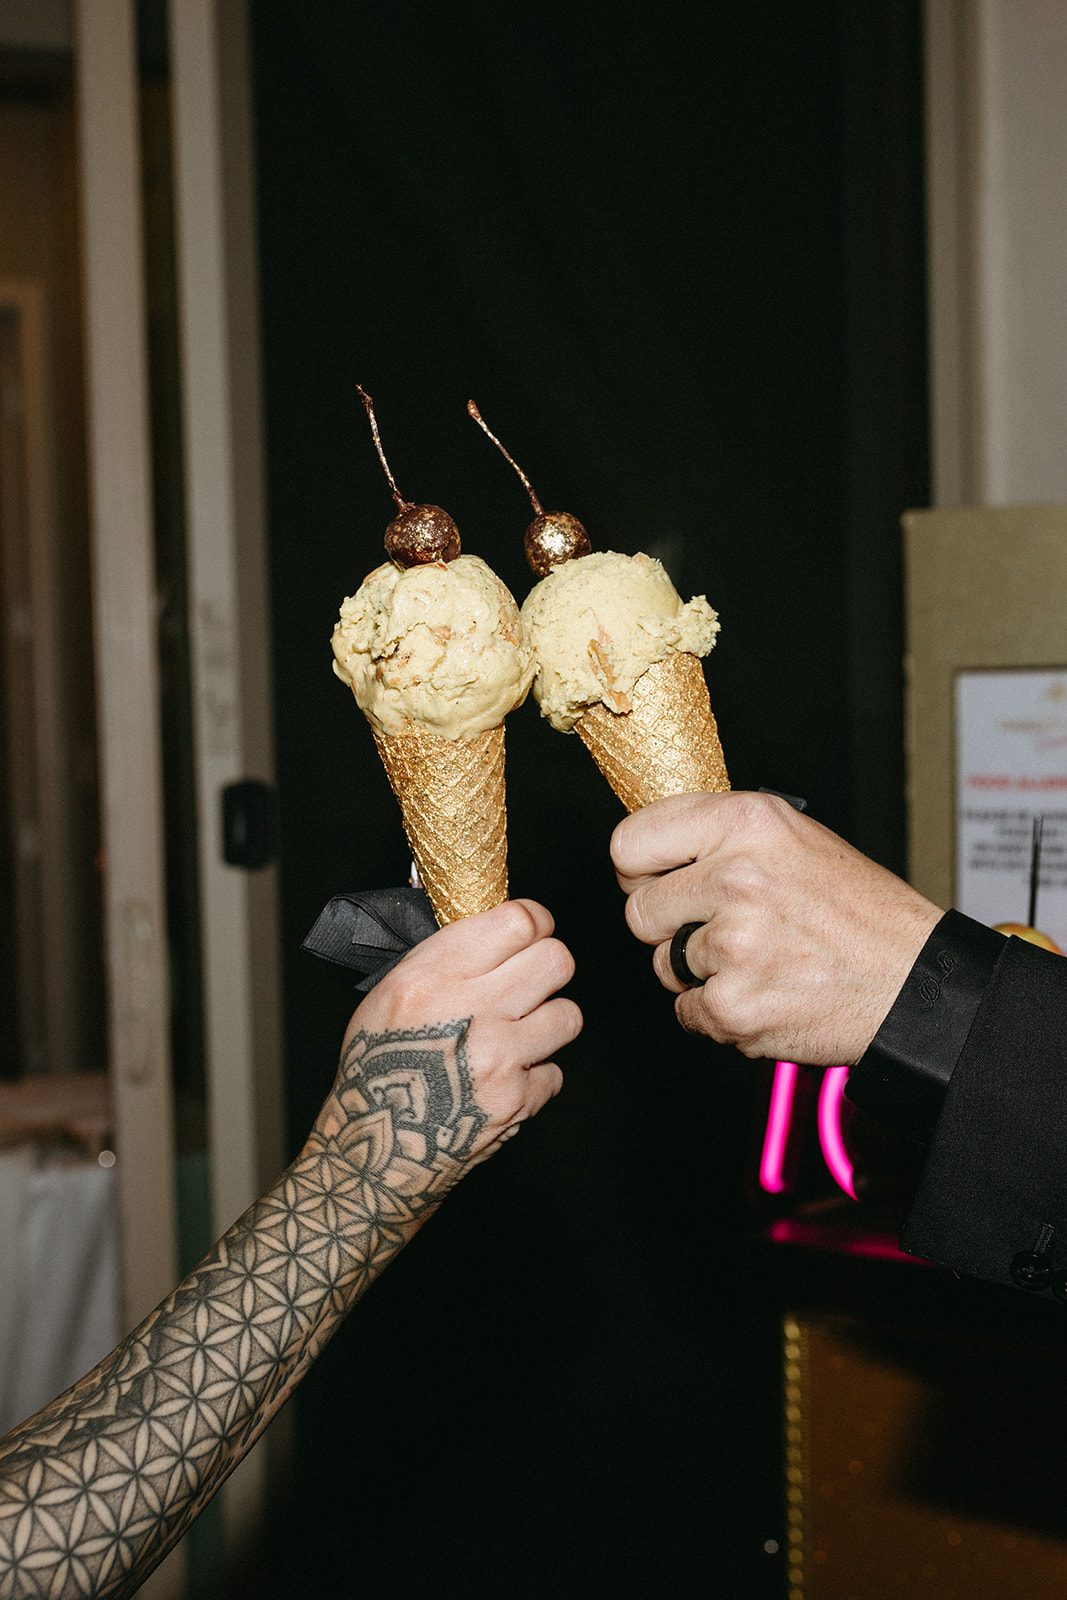 Bride and Groom doing a Cheers with their Ice Cream Cone Desserts during Little White Wedding Chapel Modern Vegas Wedding Reception 